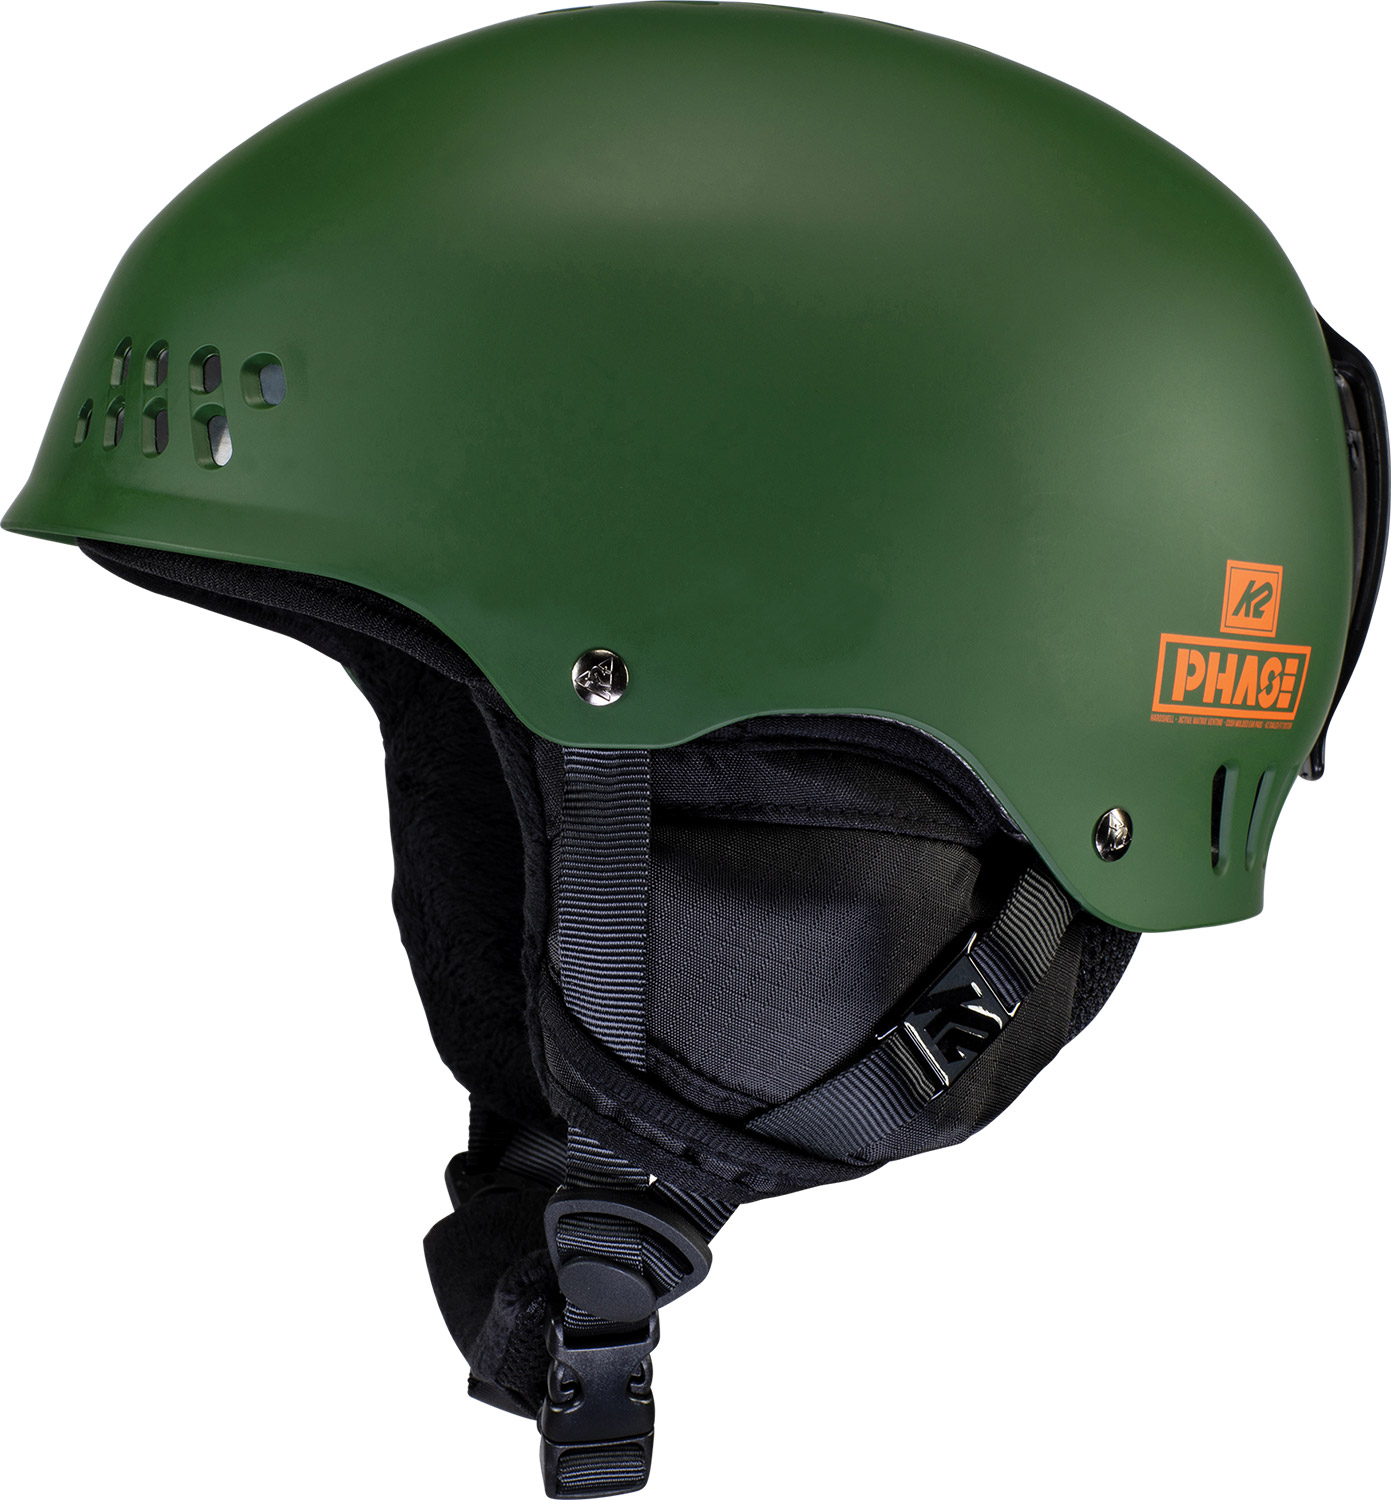 K2 Phase Pro Helm Forest Green 23/24 23635